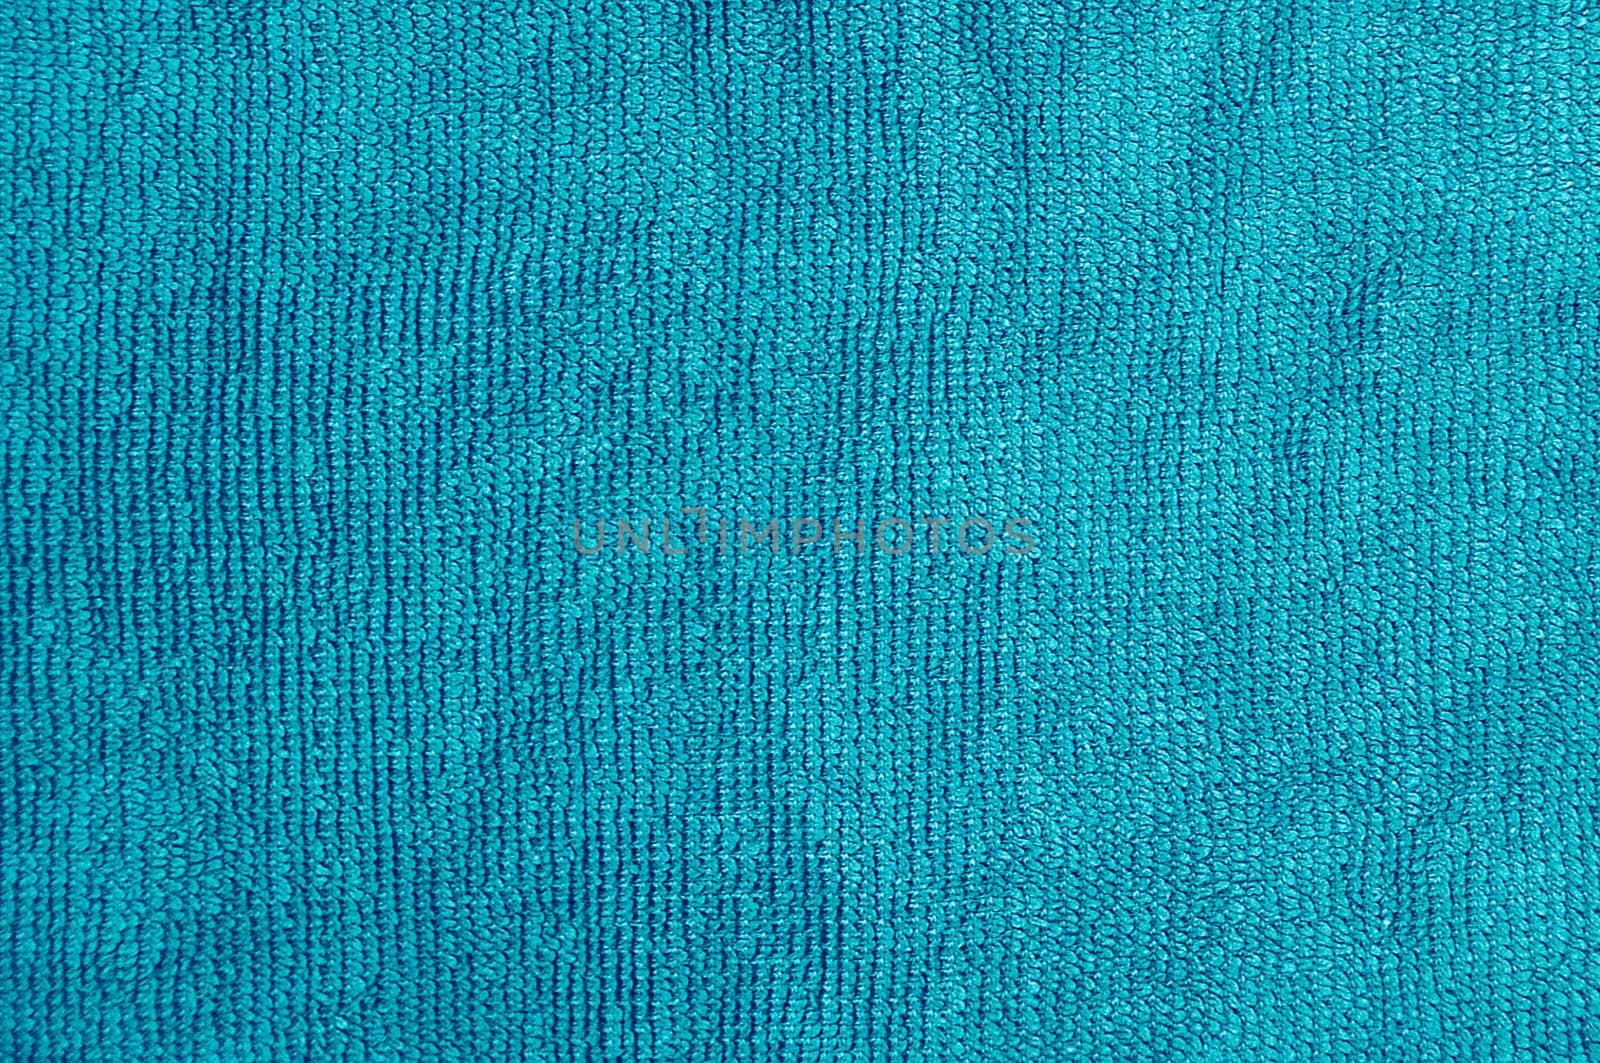 Blue towel texture, vibrant colors and strong shading expanse